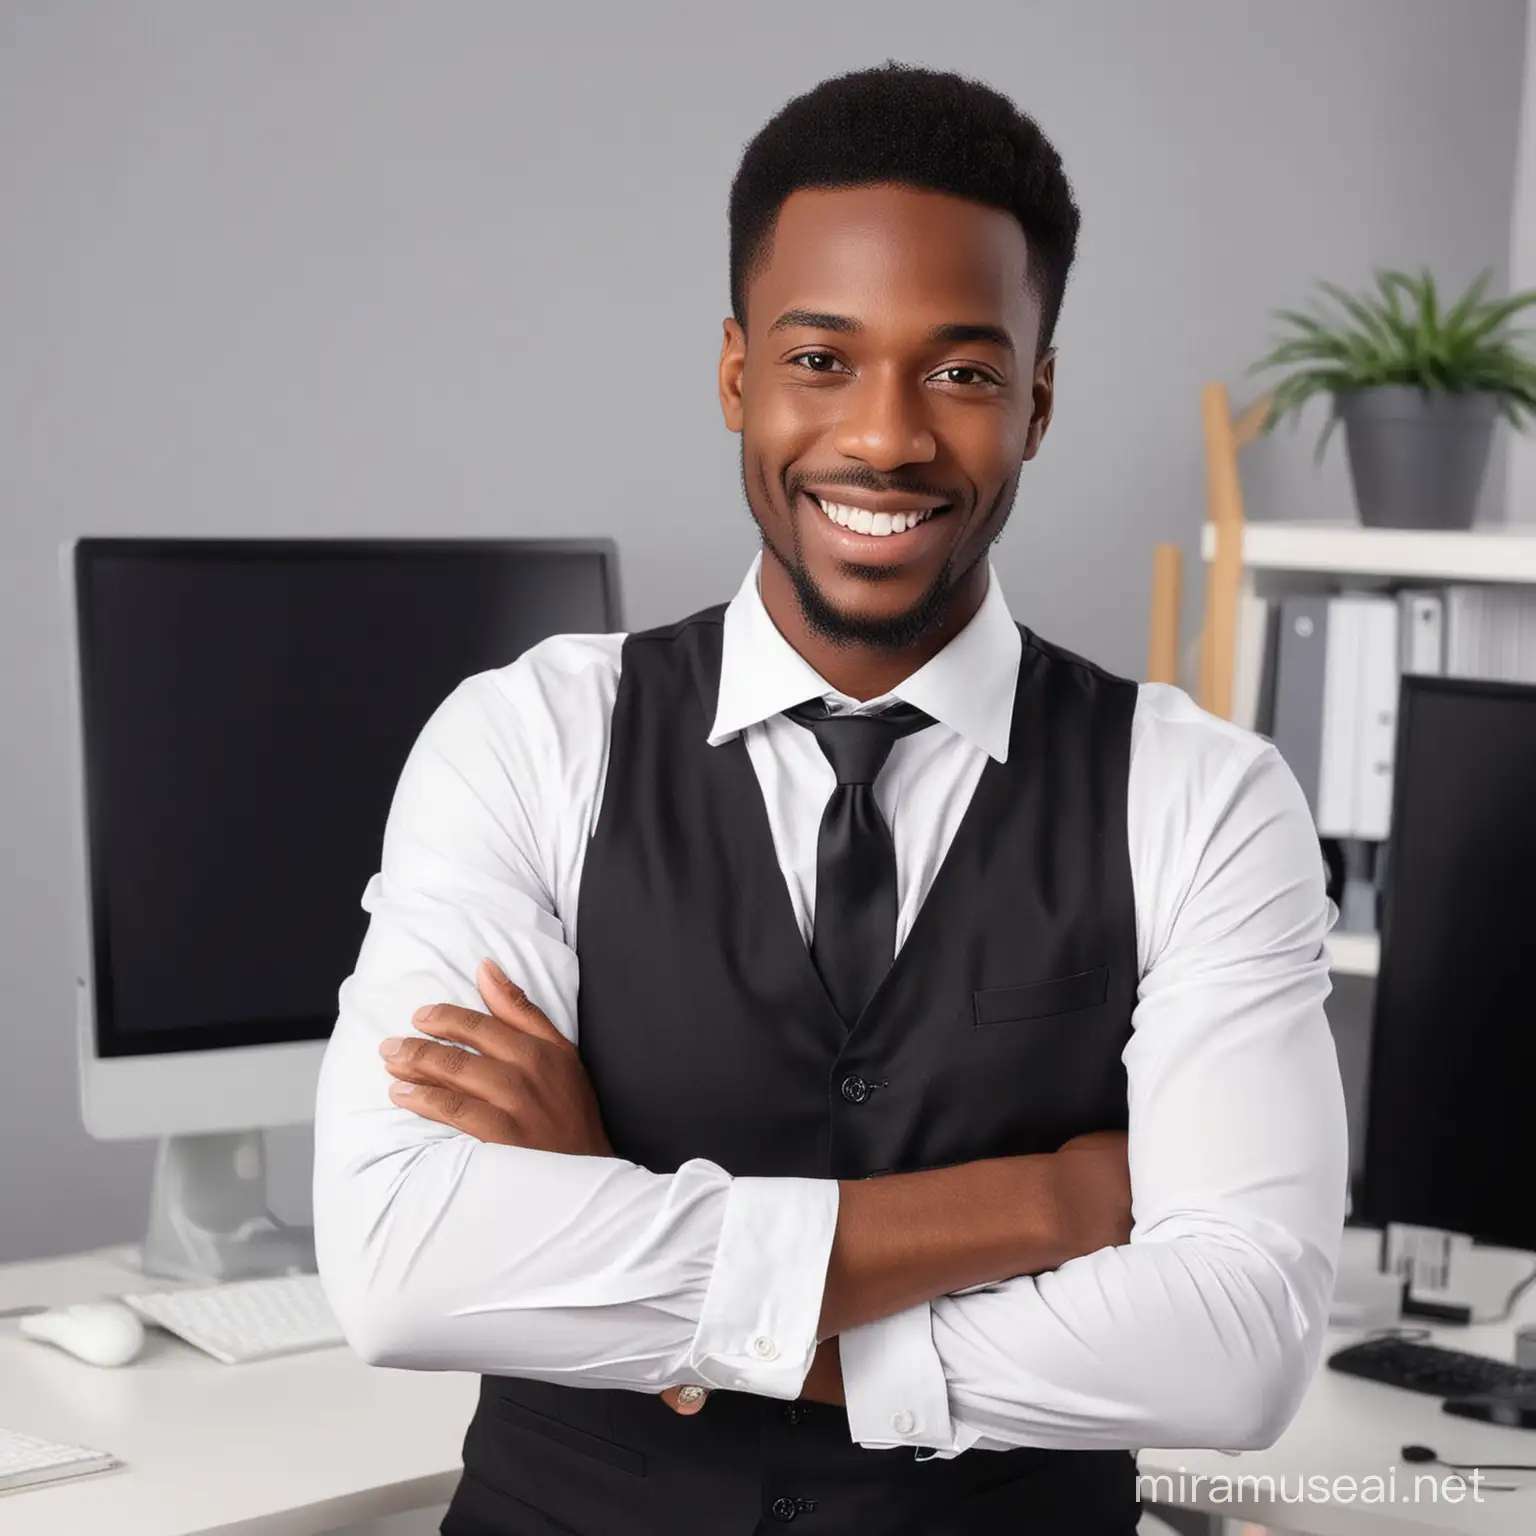 Professional African American Man Smiling in Office Setting